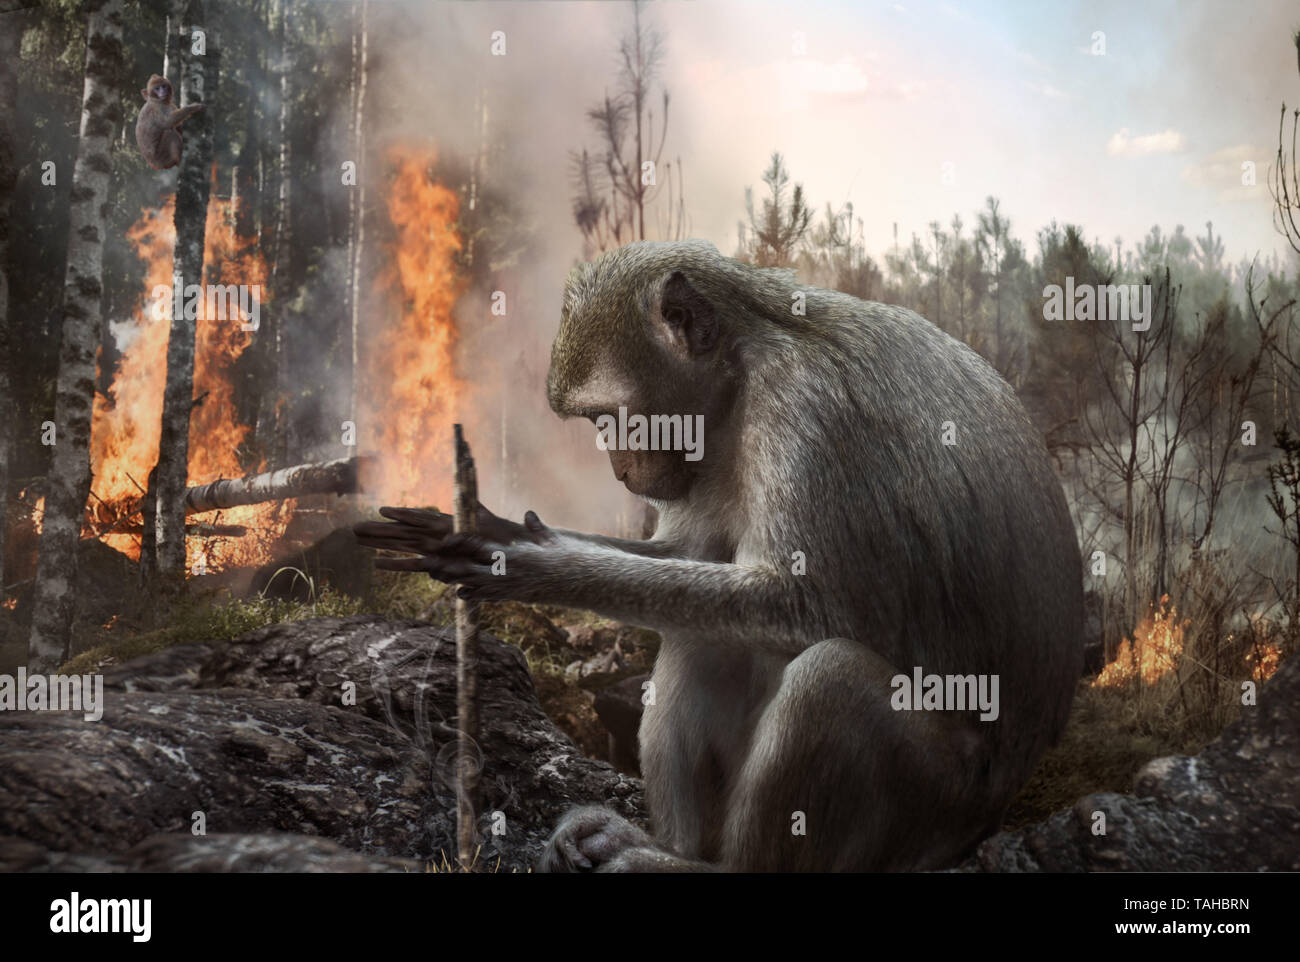 Pyromaniac mokey setting fire in the forest. Deforestation, danger, environment. Stock Photo